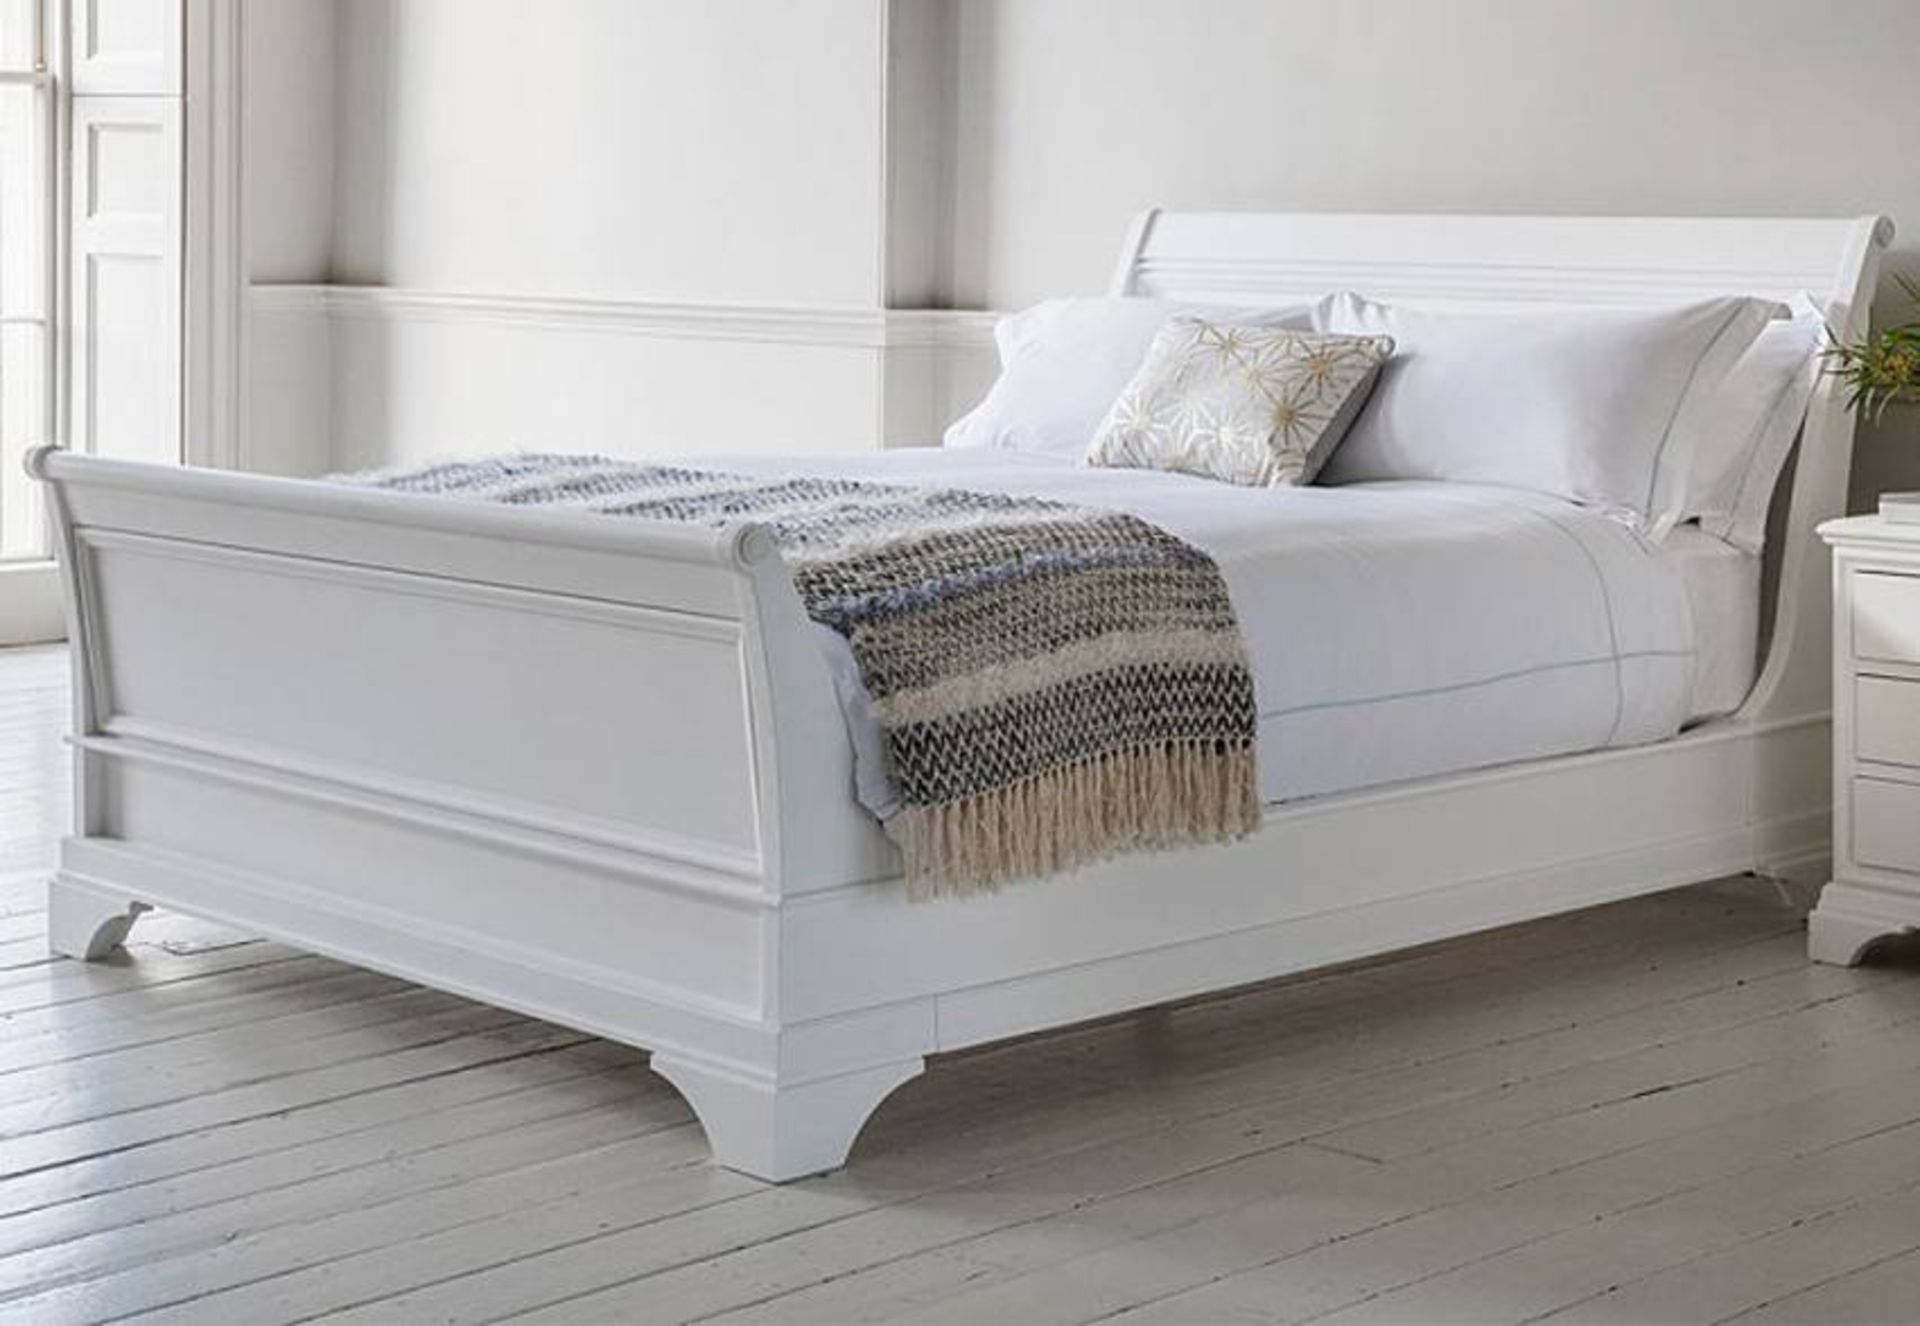 Laura Ashley Gabrielle Dove Grey 5" High Bedstead The Gabrielle collection boasts classic French